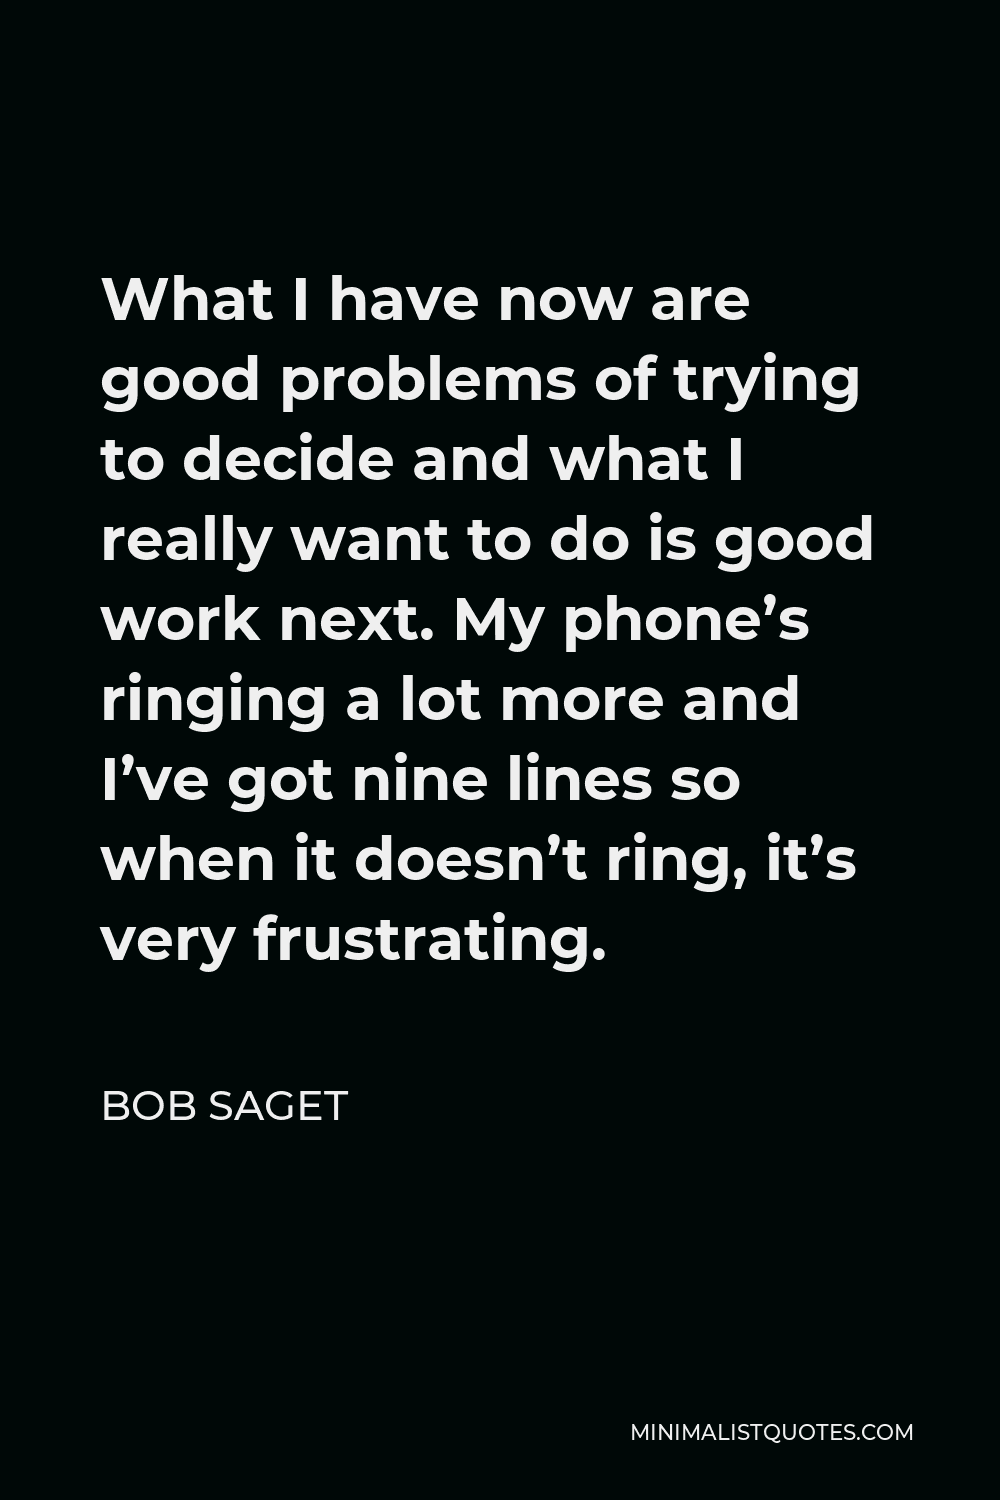 Bob Saget Quote - What I have now are good problems of trying to decide and what I really want to do is good work next. My phone’s ringing a lot more and I’ve got nine lines so when it doesn’t ring, it’s very frustrating.